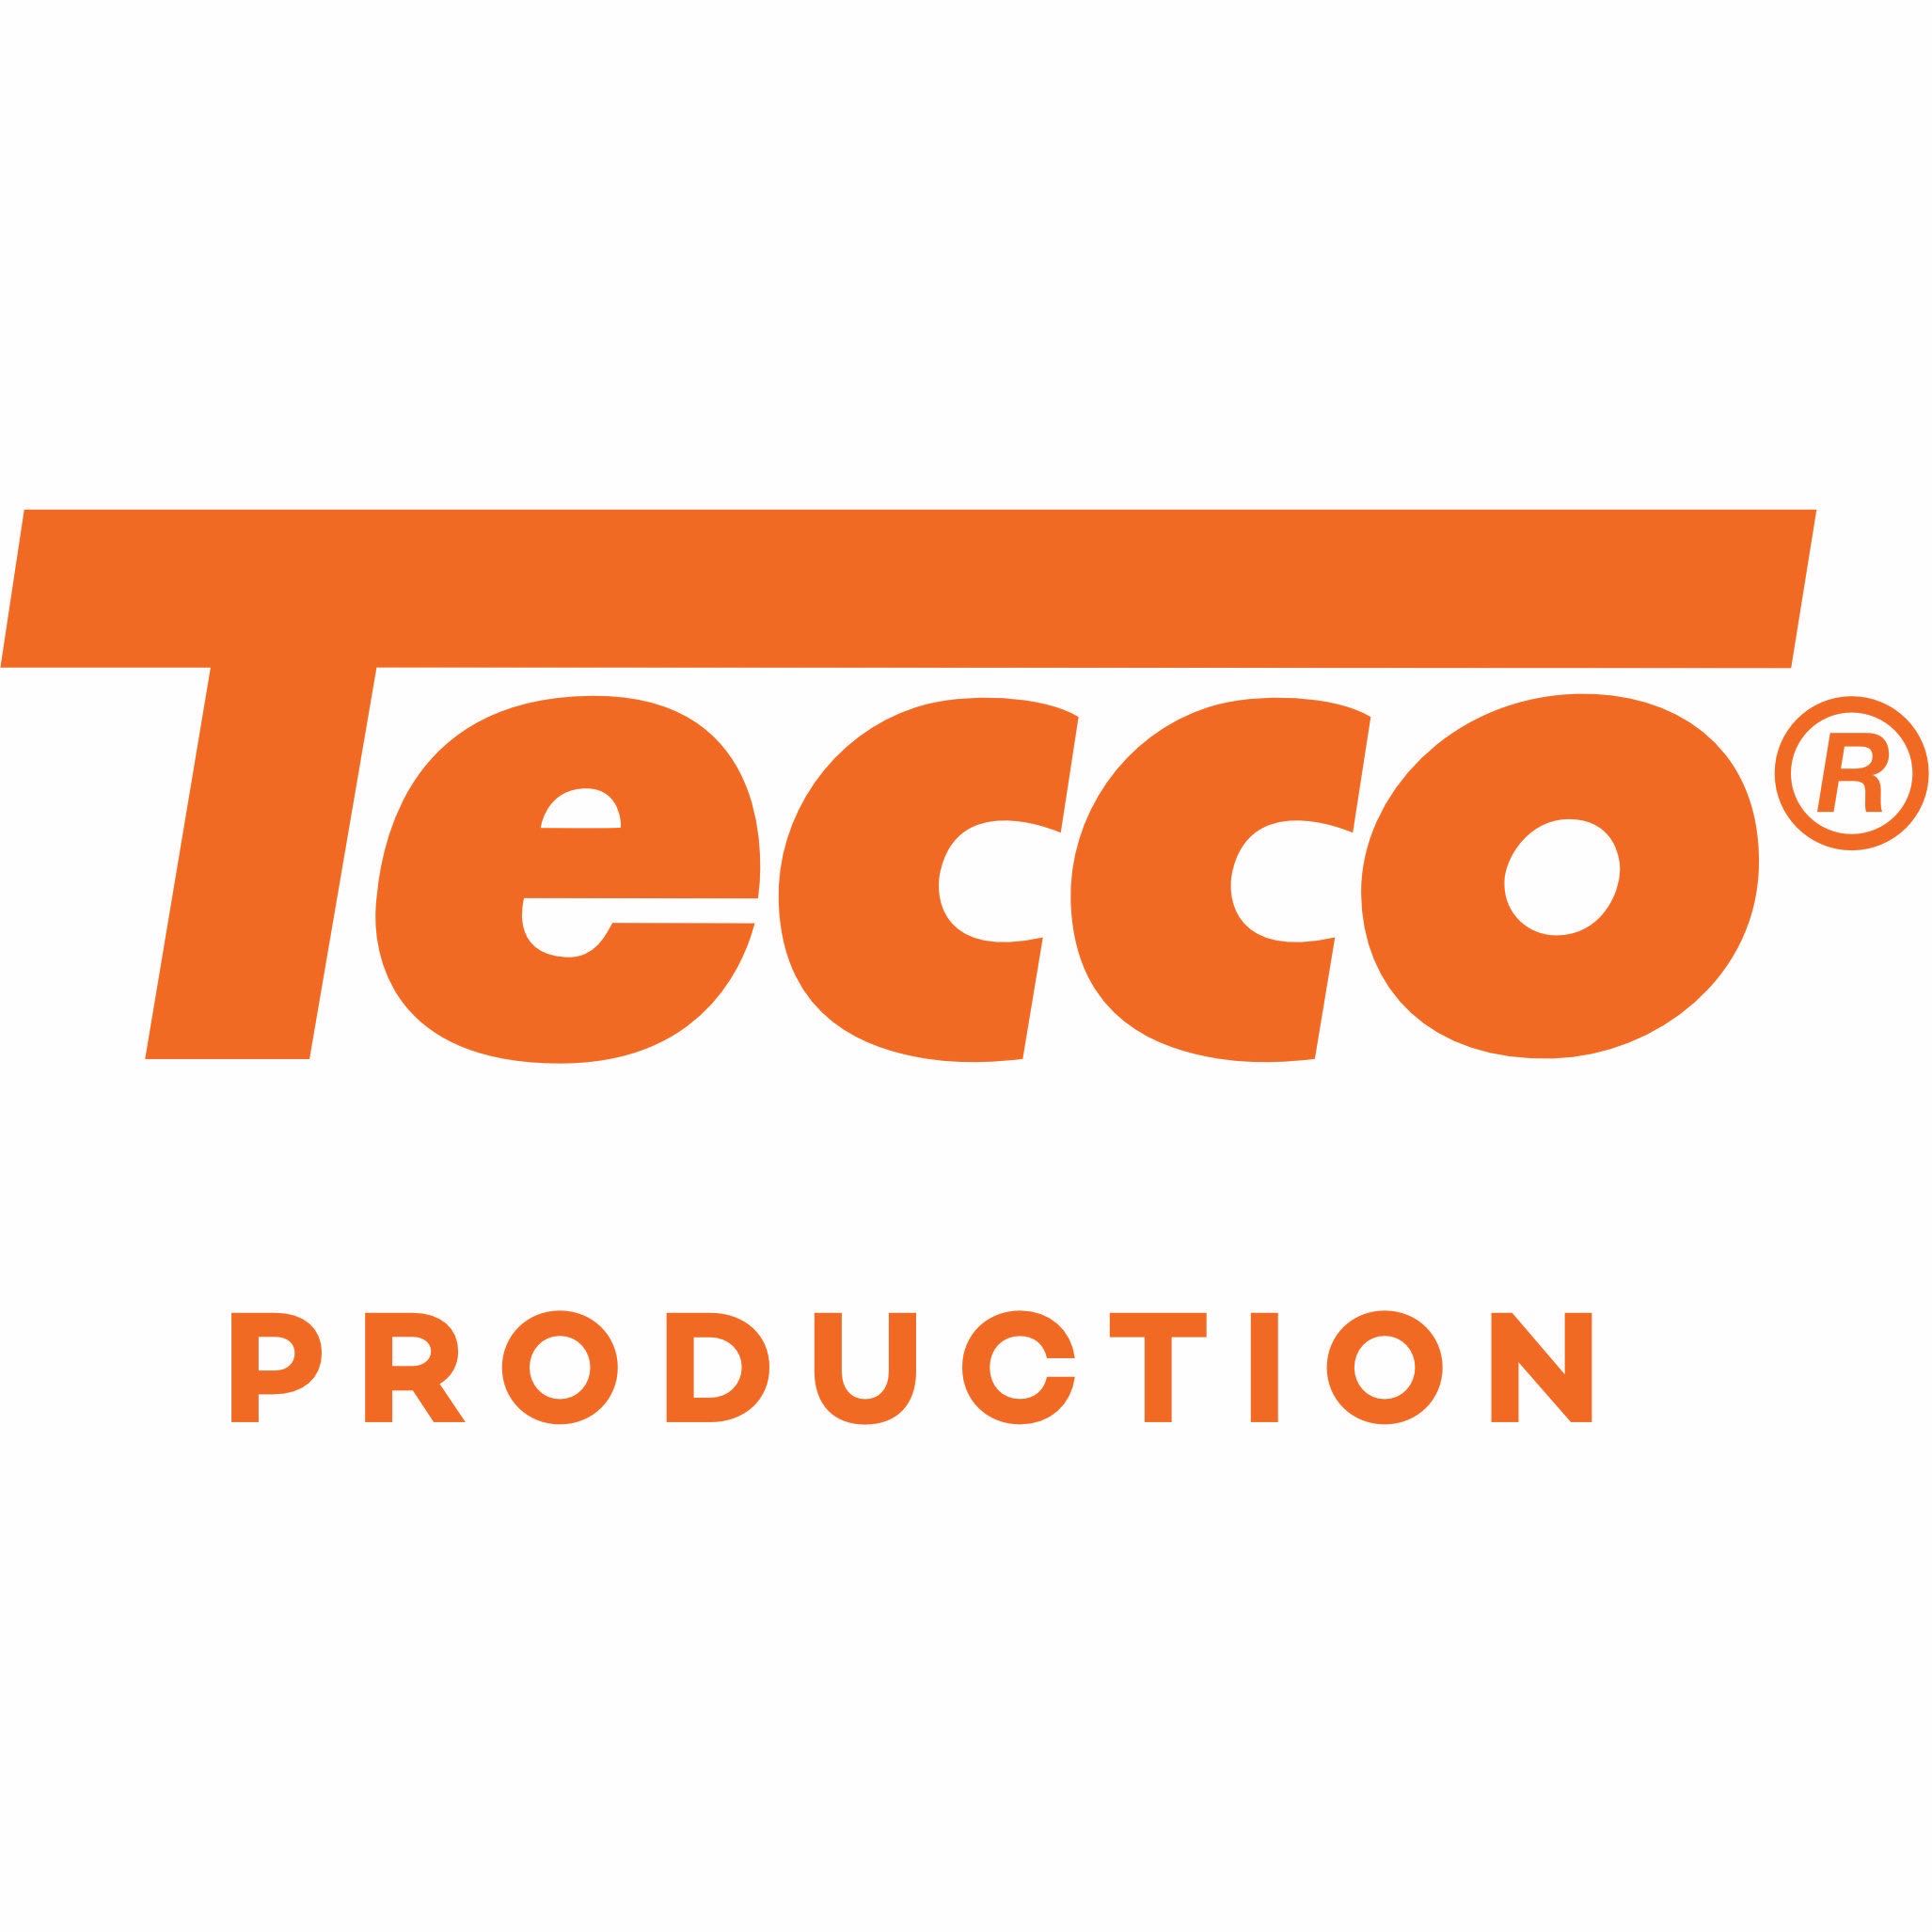 Tecco:Production PG170 Poster Glossy